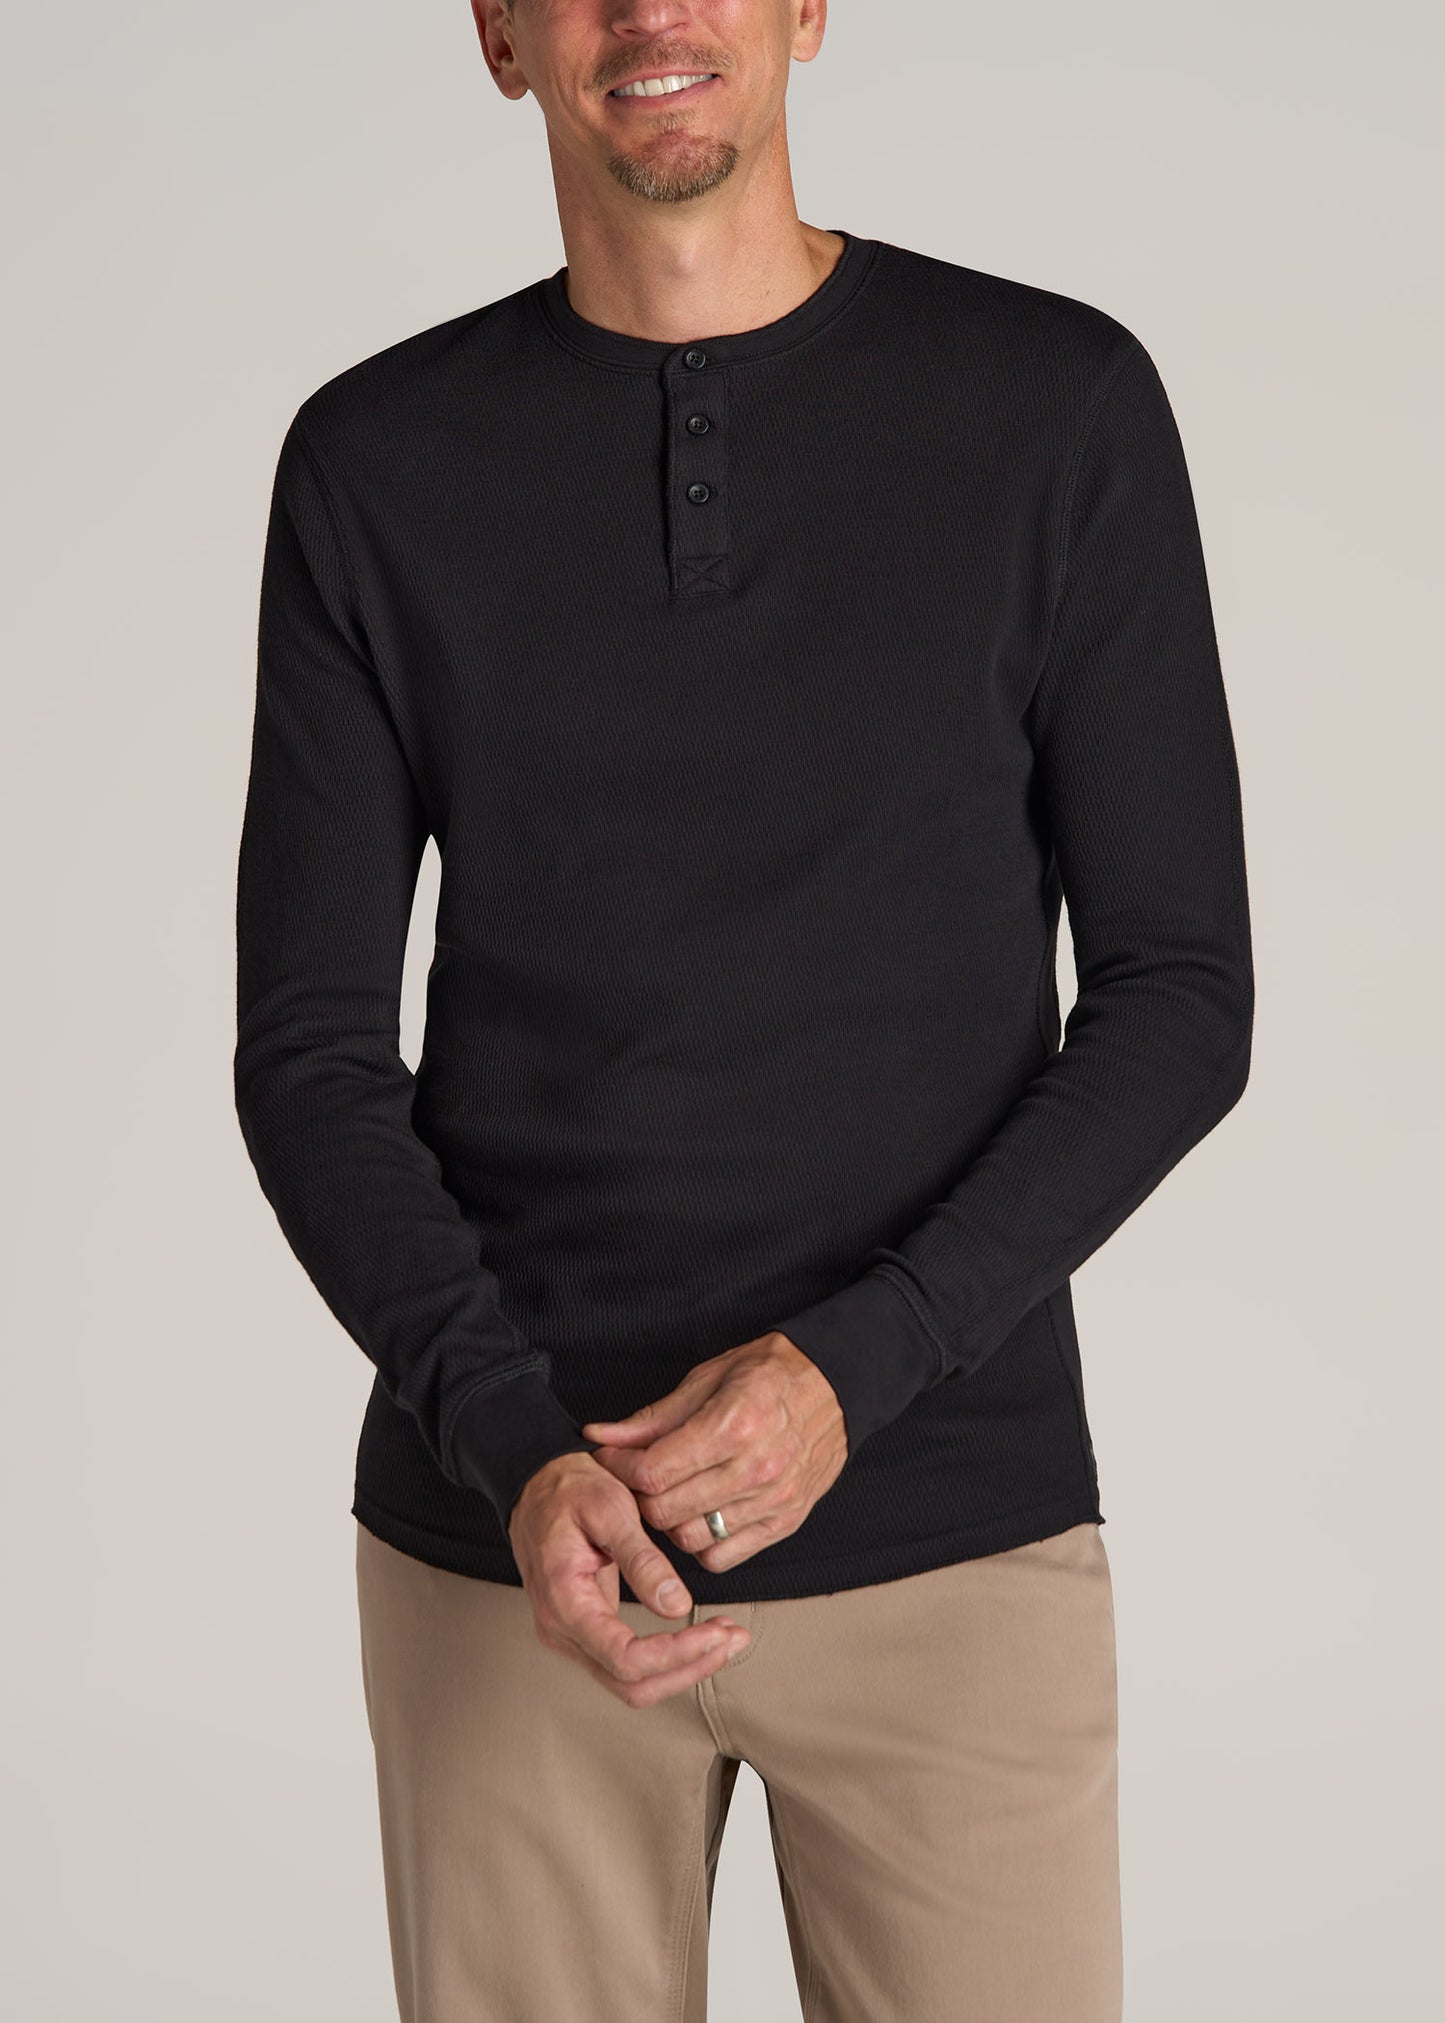 Double Honeycomb Thermal Long-Sleeve Henley Shirt for Tall Men ...